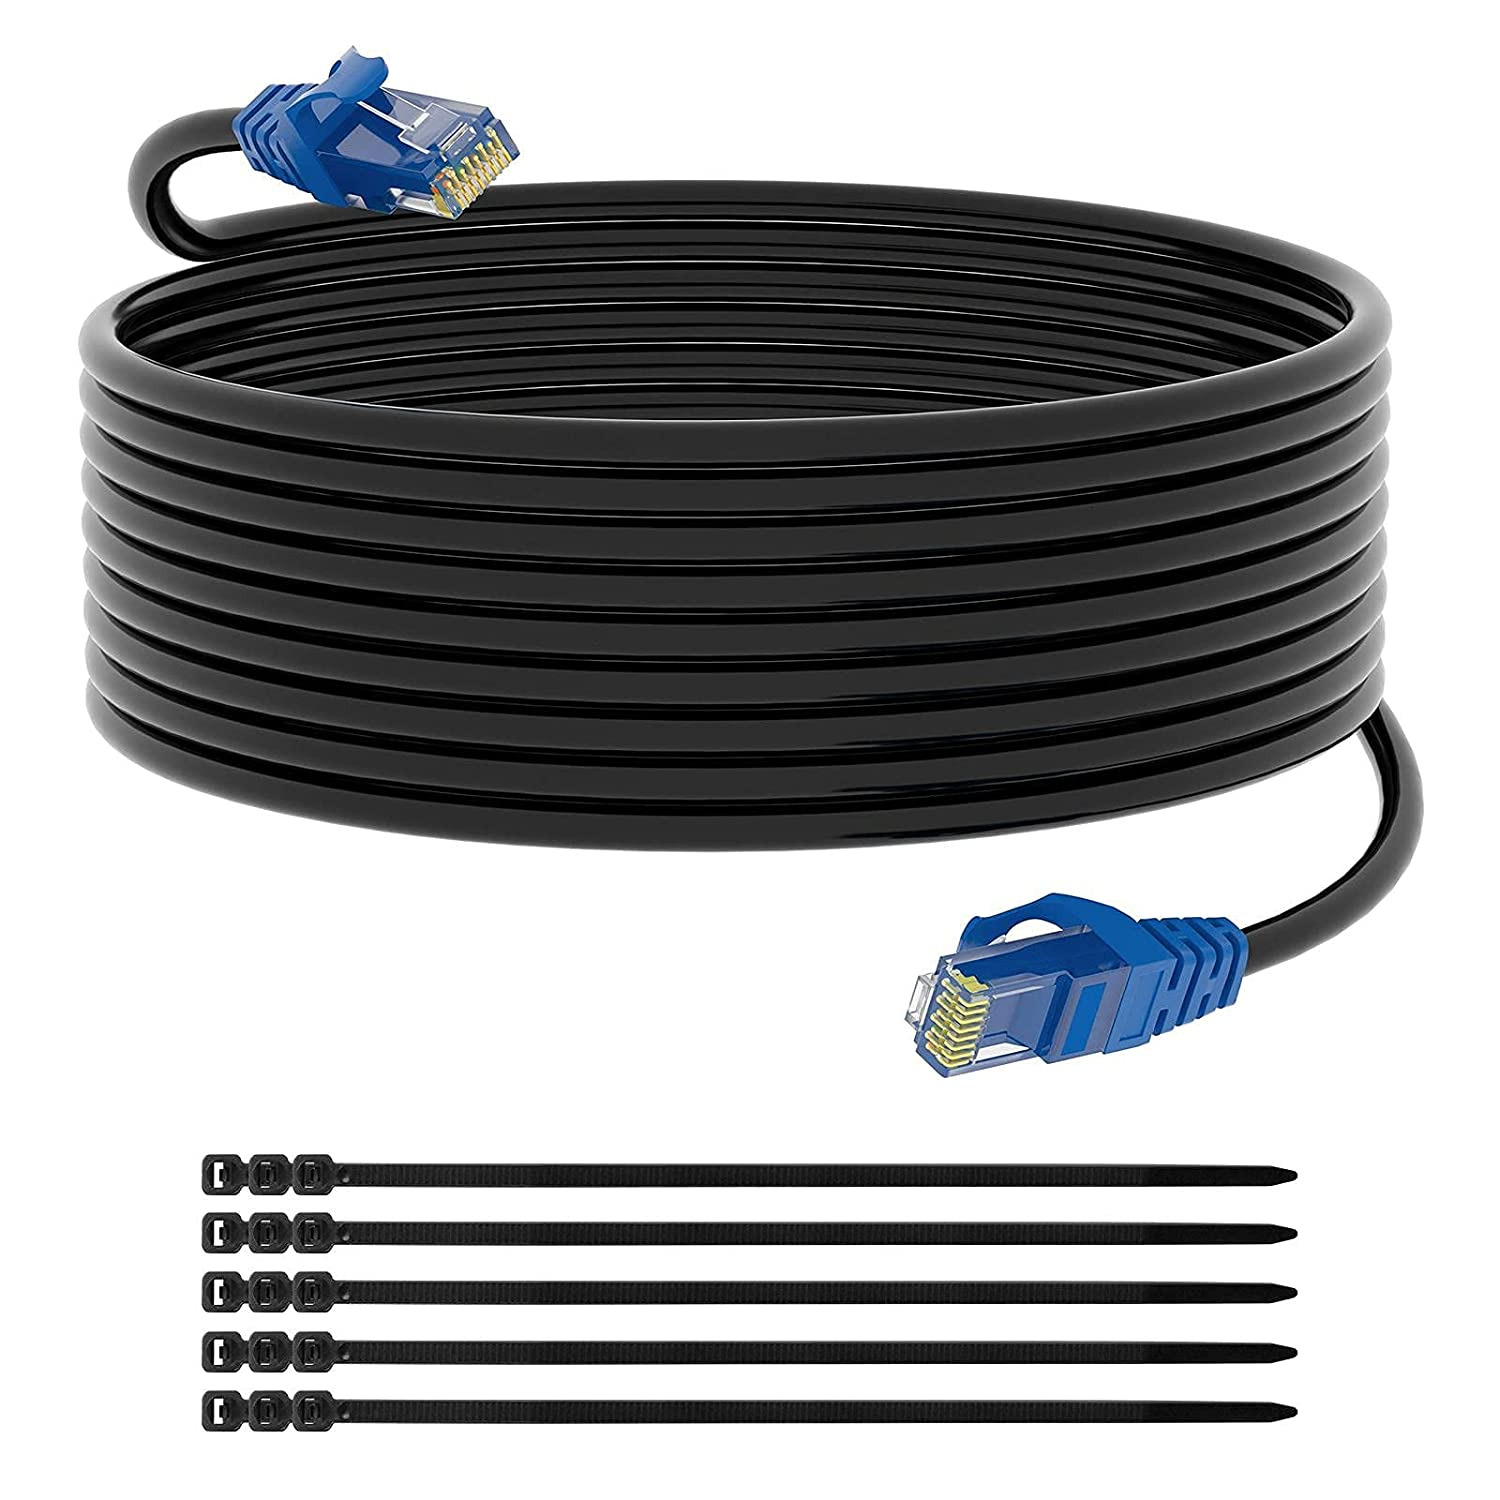 Cat 6 Outdoor Ethernet Cable 250 Feet Heavy Duty Cord Waterproof Direct Burial